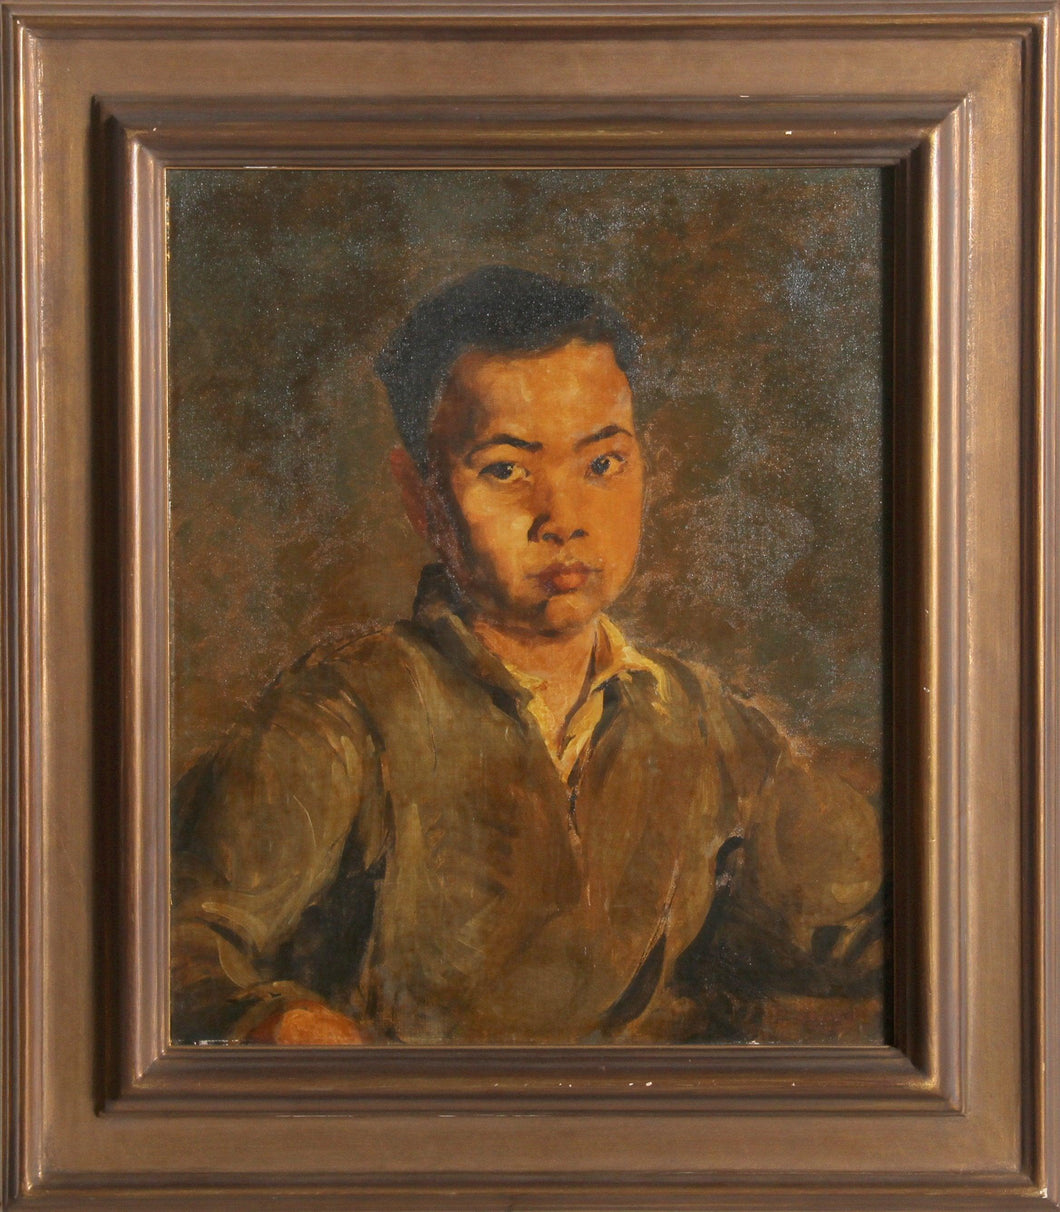 Chinese Boy - Kong Oil | Charles Cabot Daniels,{{product.type}}